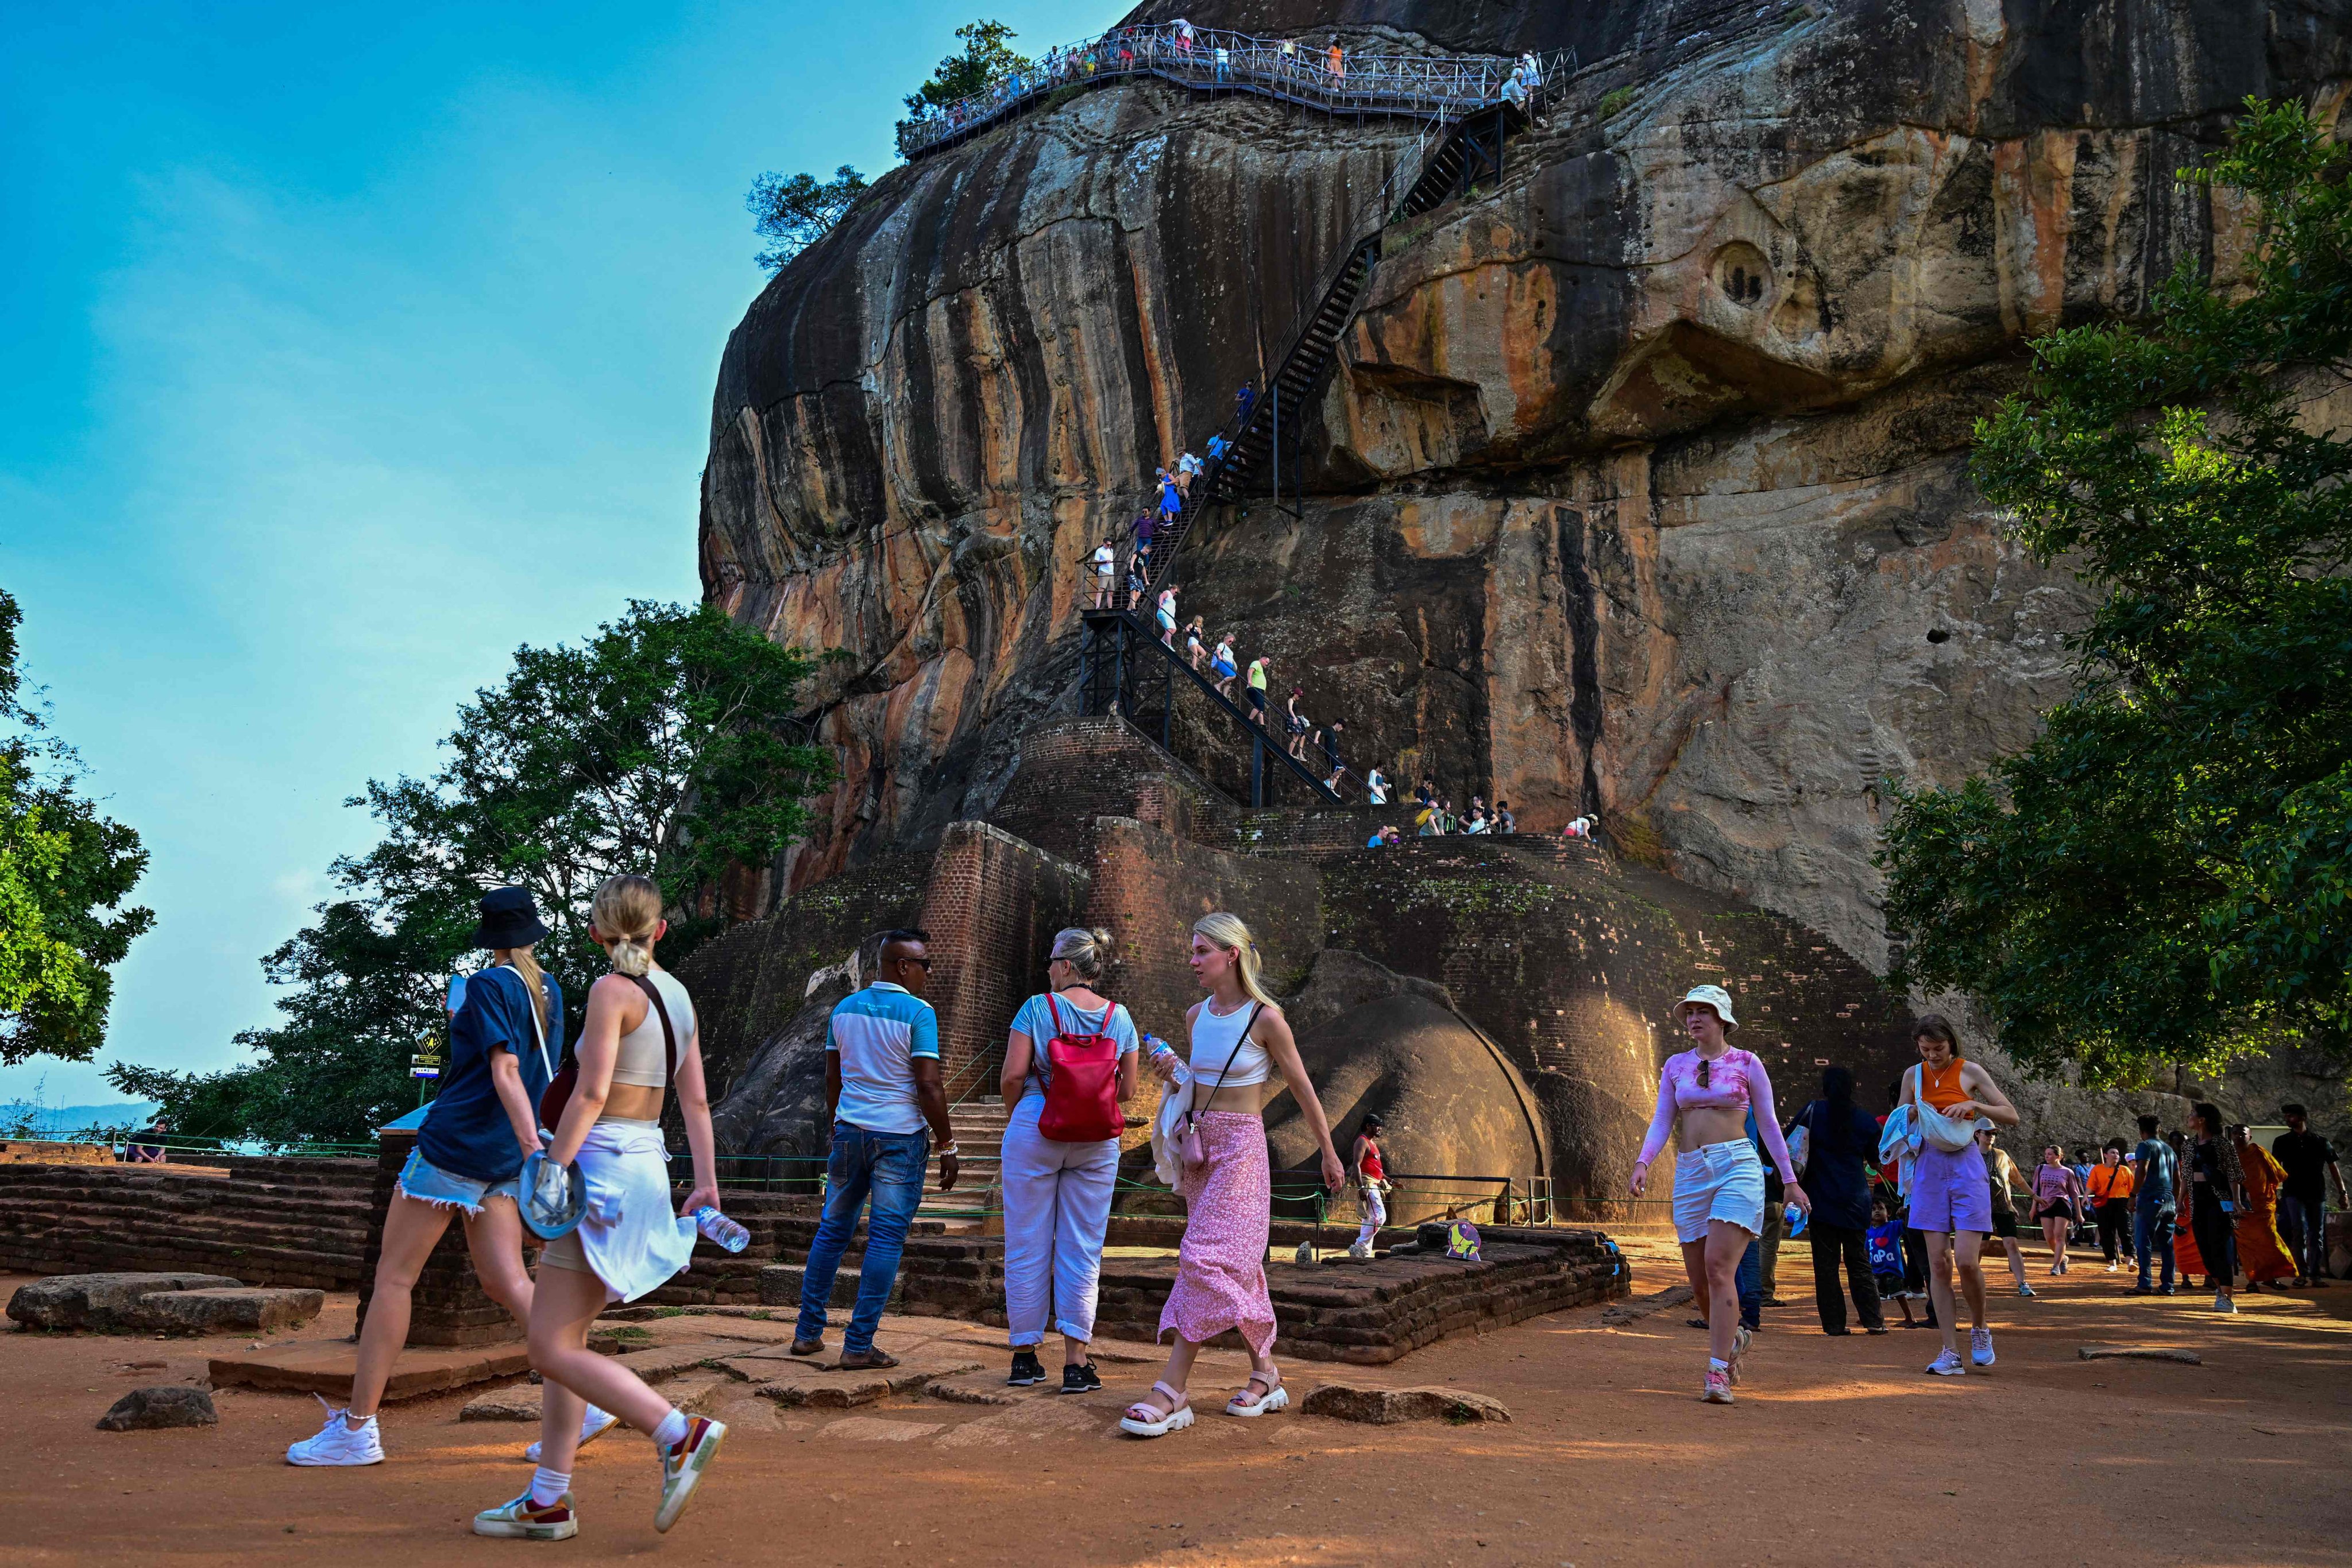 Foreign tourists visit an ancient rock fortress in Sigiriya, Sri Lanka, last month. Photo: AFP